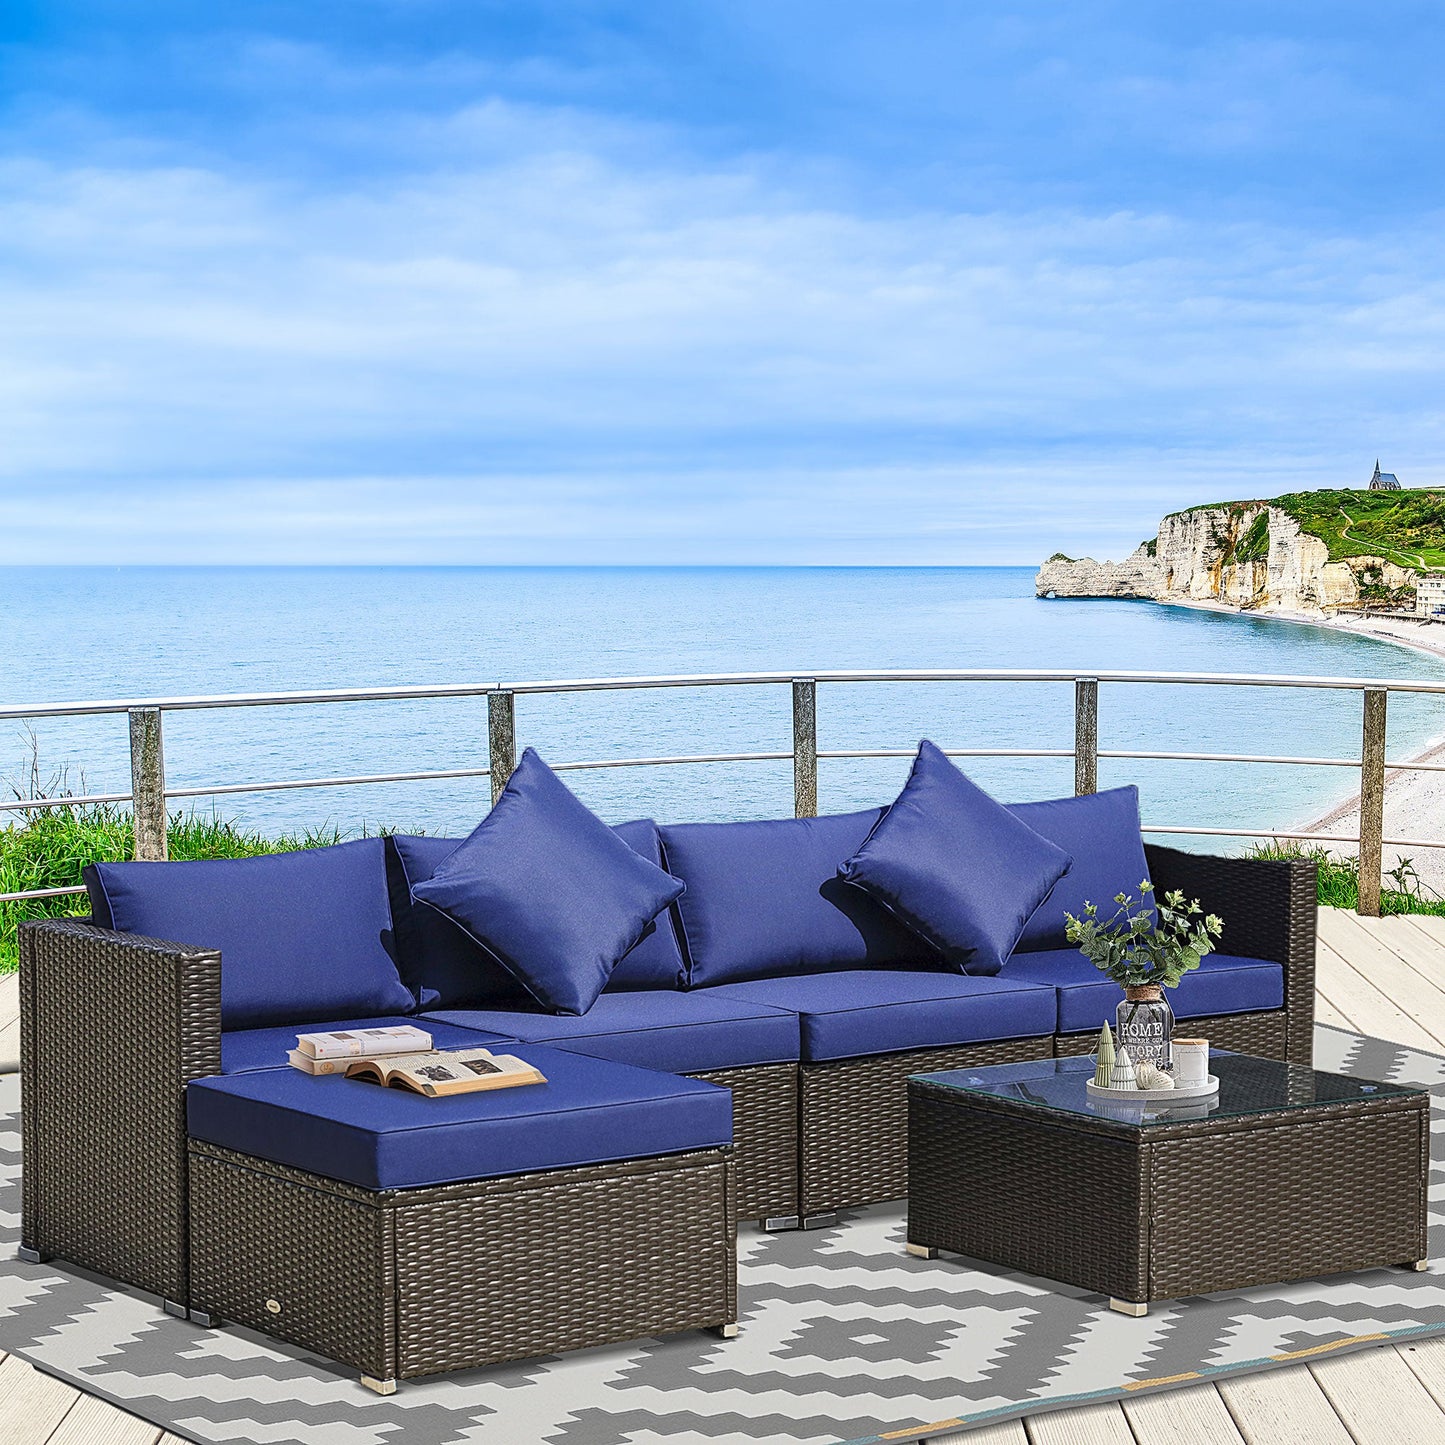 Outdoor and Garden-6 Pieces Outdoor PE Rattan Sofa Set, Sectional Conversation Wicker Patio Couch Furniture Set with Cushions and Coffee Table, Blue - Outdoor Style Company